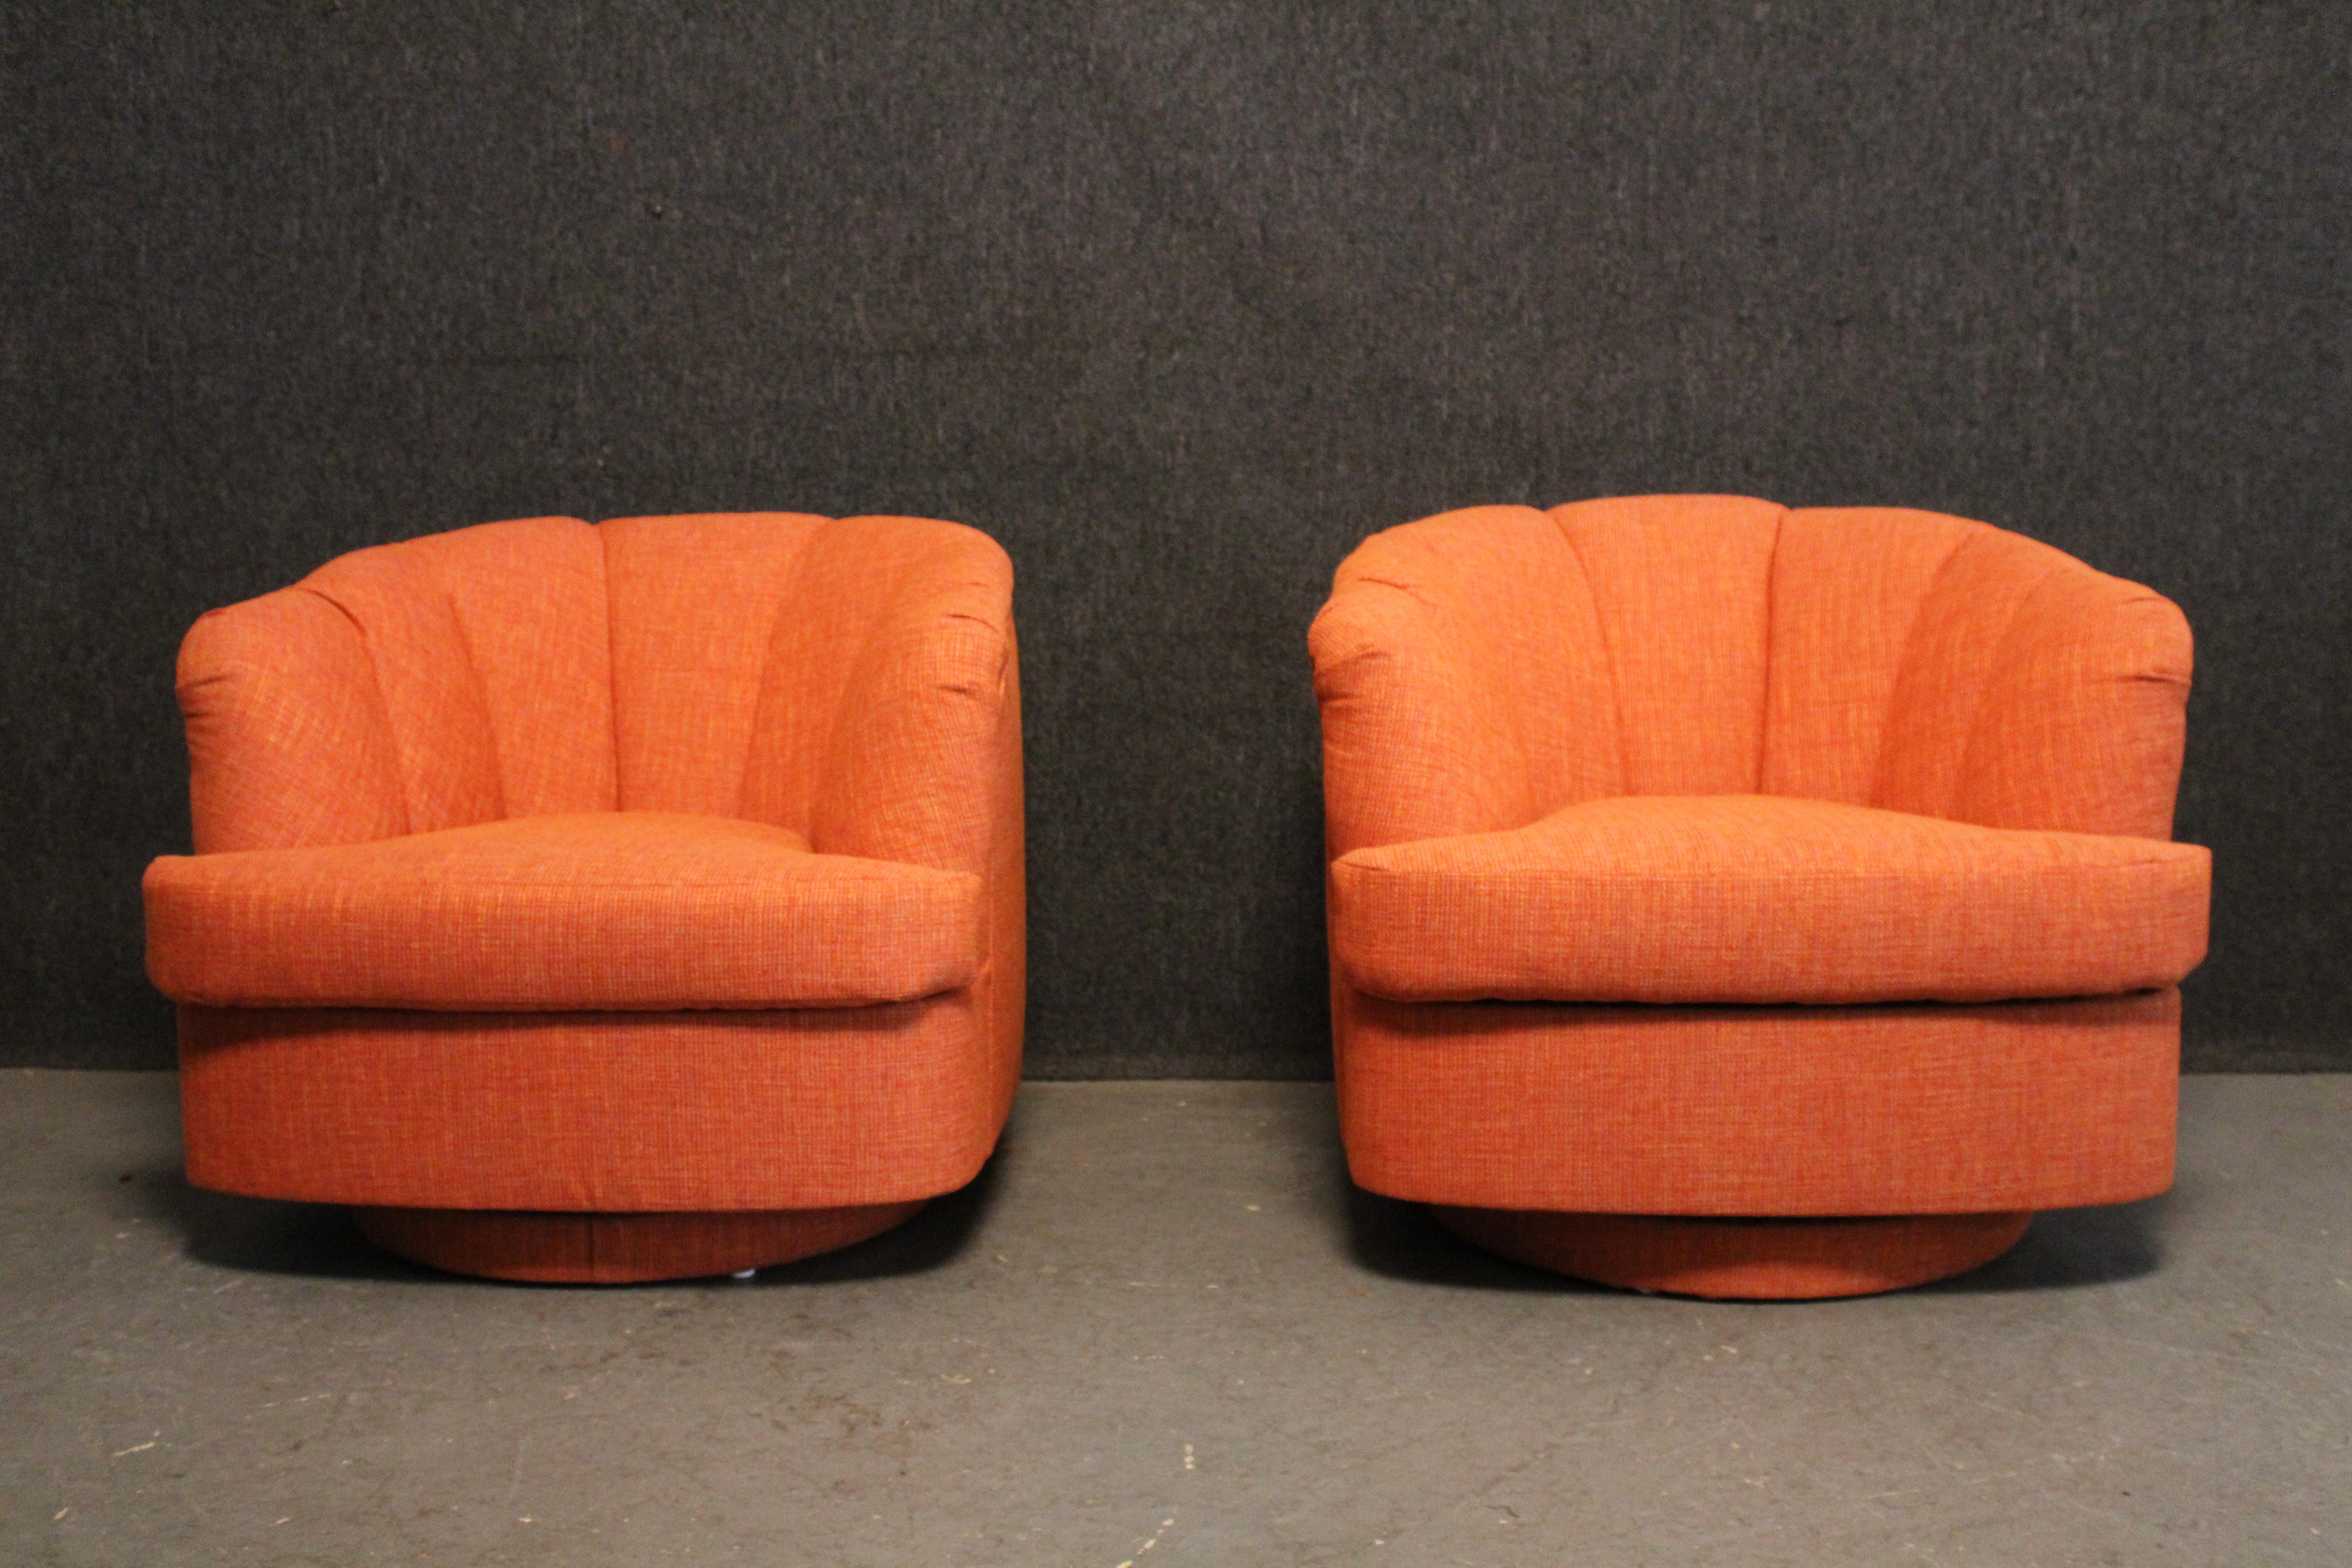 Blend a vintage look with a modern feel with this fantastic pair of newly reupholstered Mid-Century Modern lounge chairs made by Paul McCobb's Directional Furniture brand.  The overstuffed, swiveling chairs feature a deep, tub-like seat fully